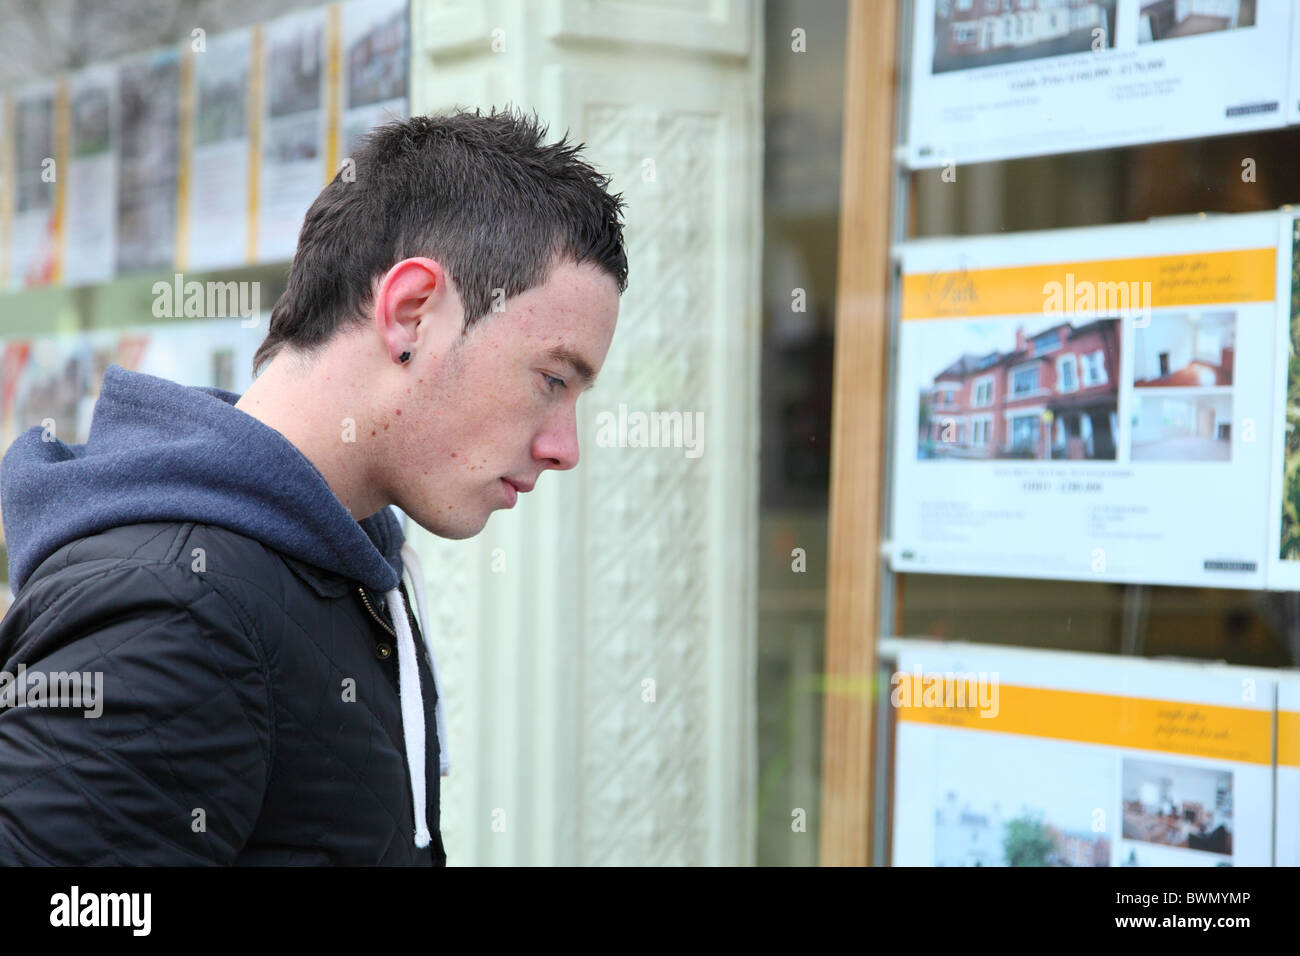 A first time buyer viewing houses in an estate agents window. Stock Photo